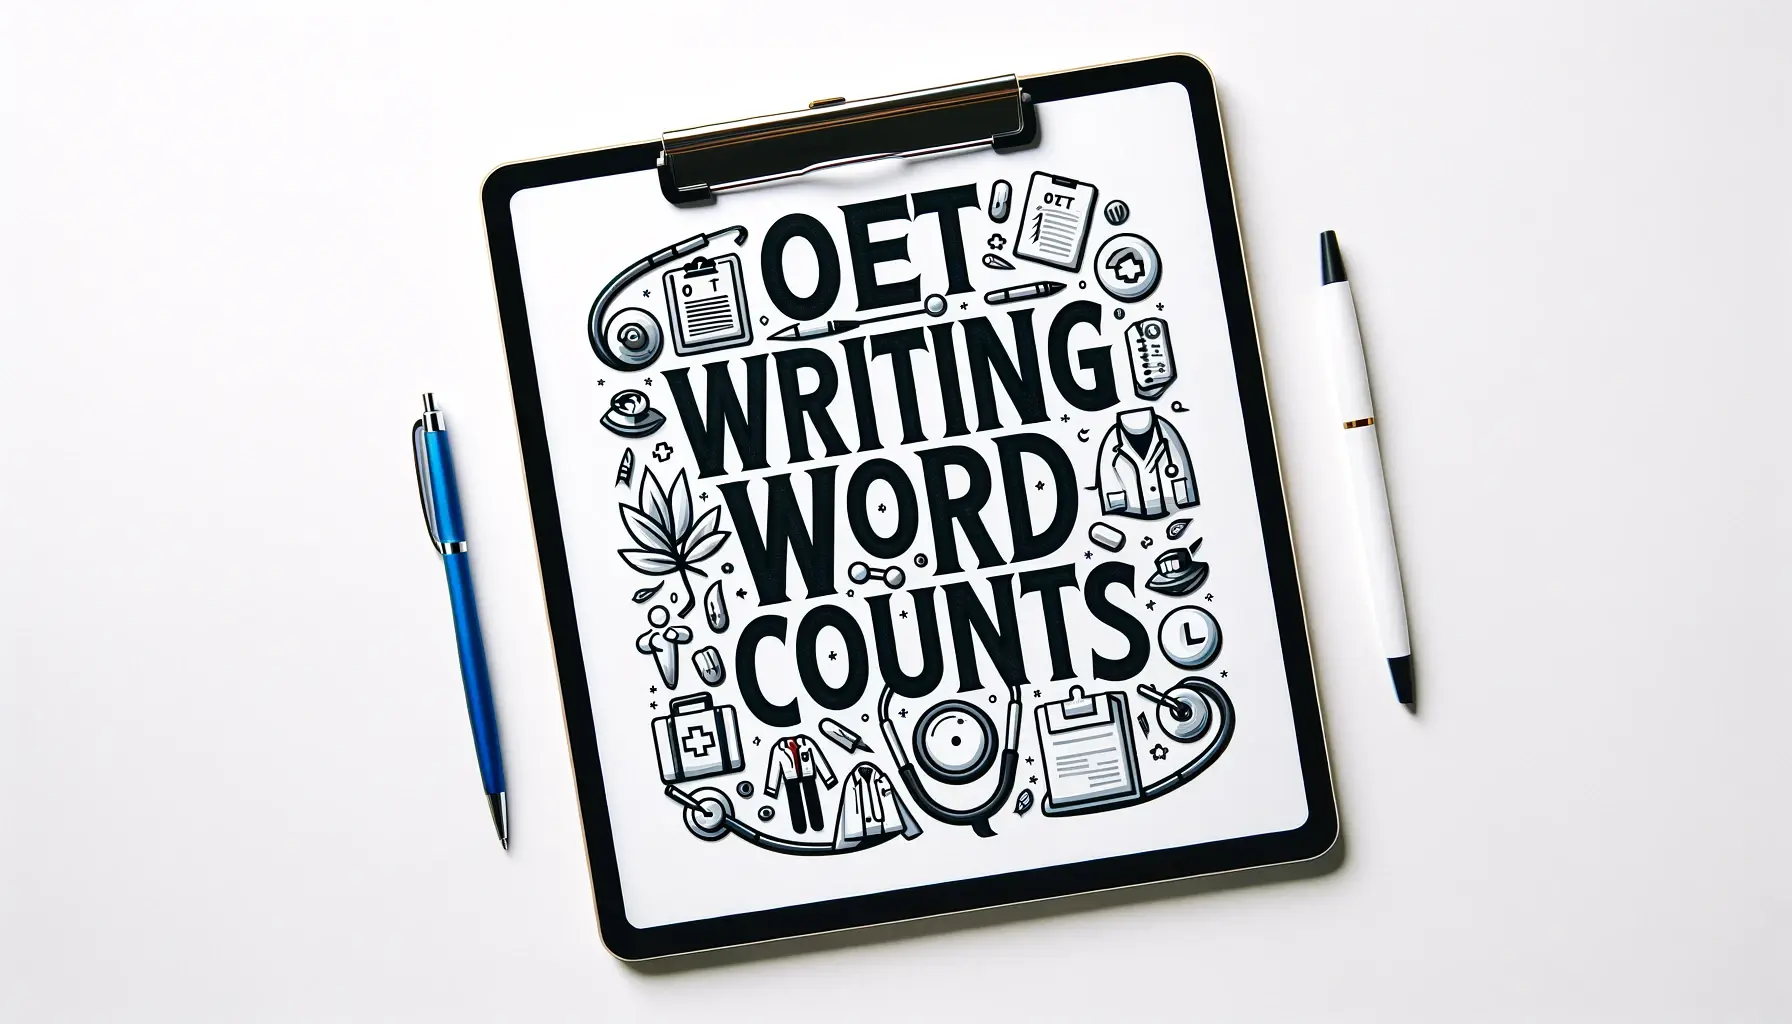 OET Writing word count rules